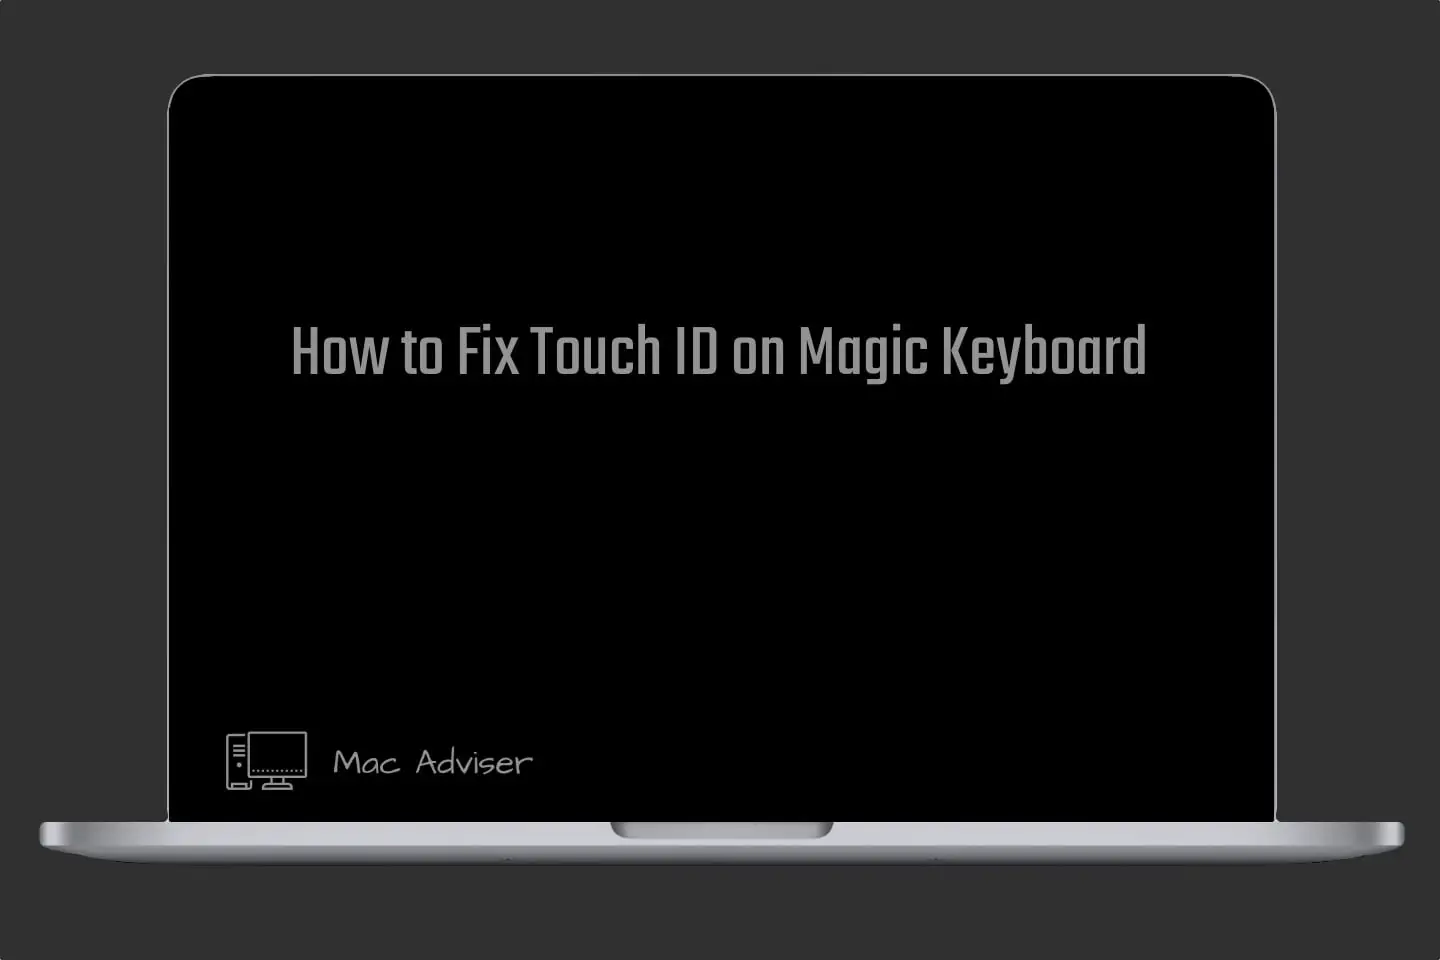 How to fix Touch ID on Magic Keyboard